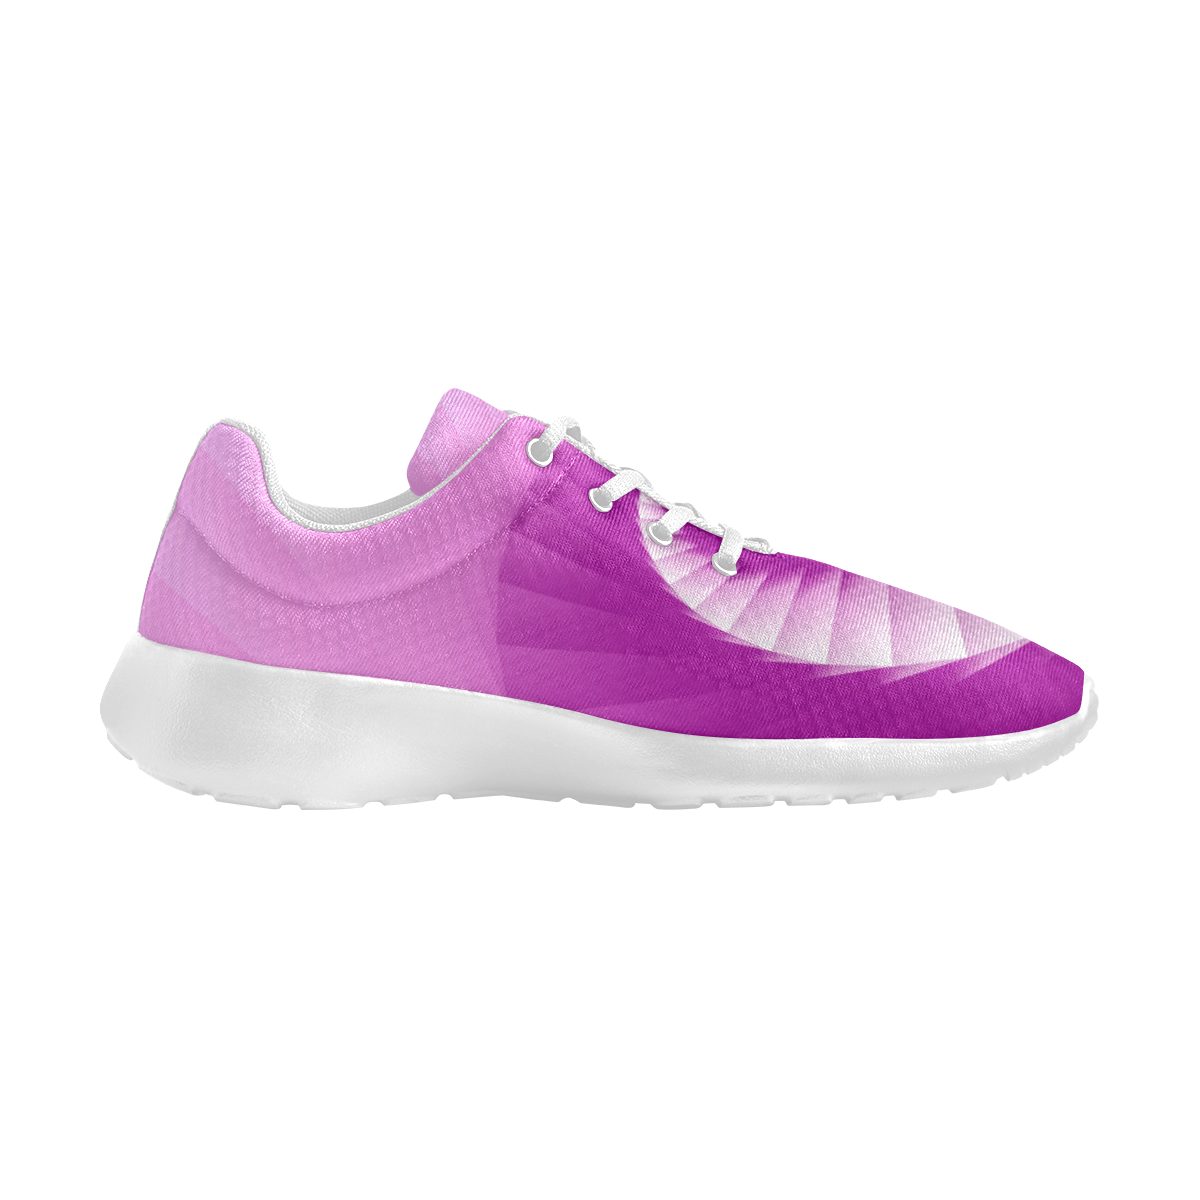 spiral-2477996 Women's Athletic Shoes (Model 0200)